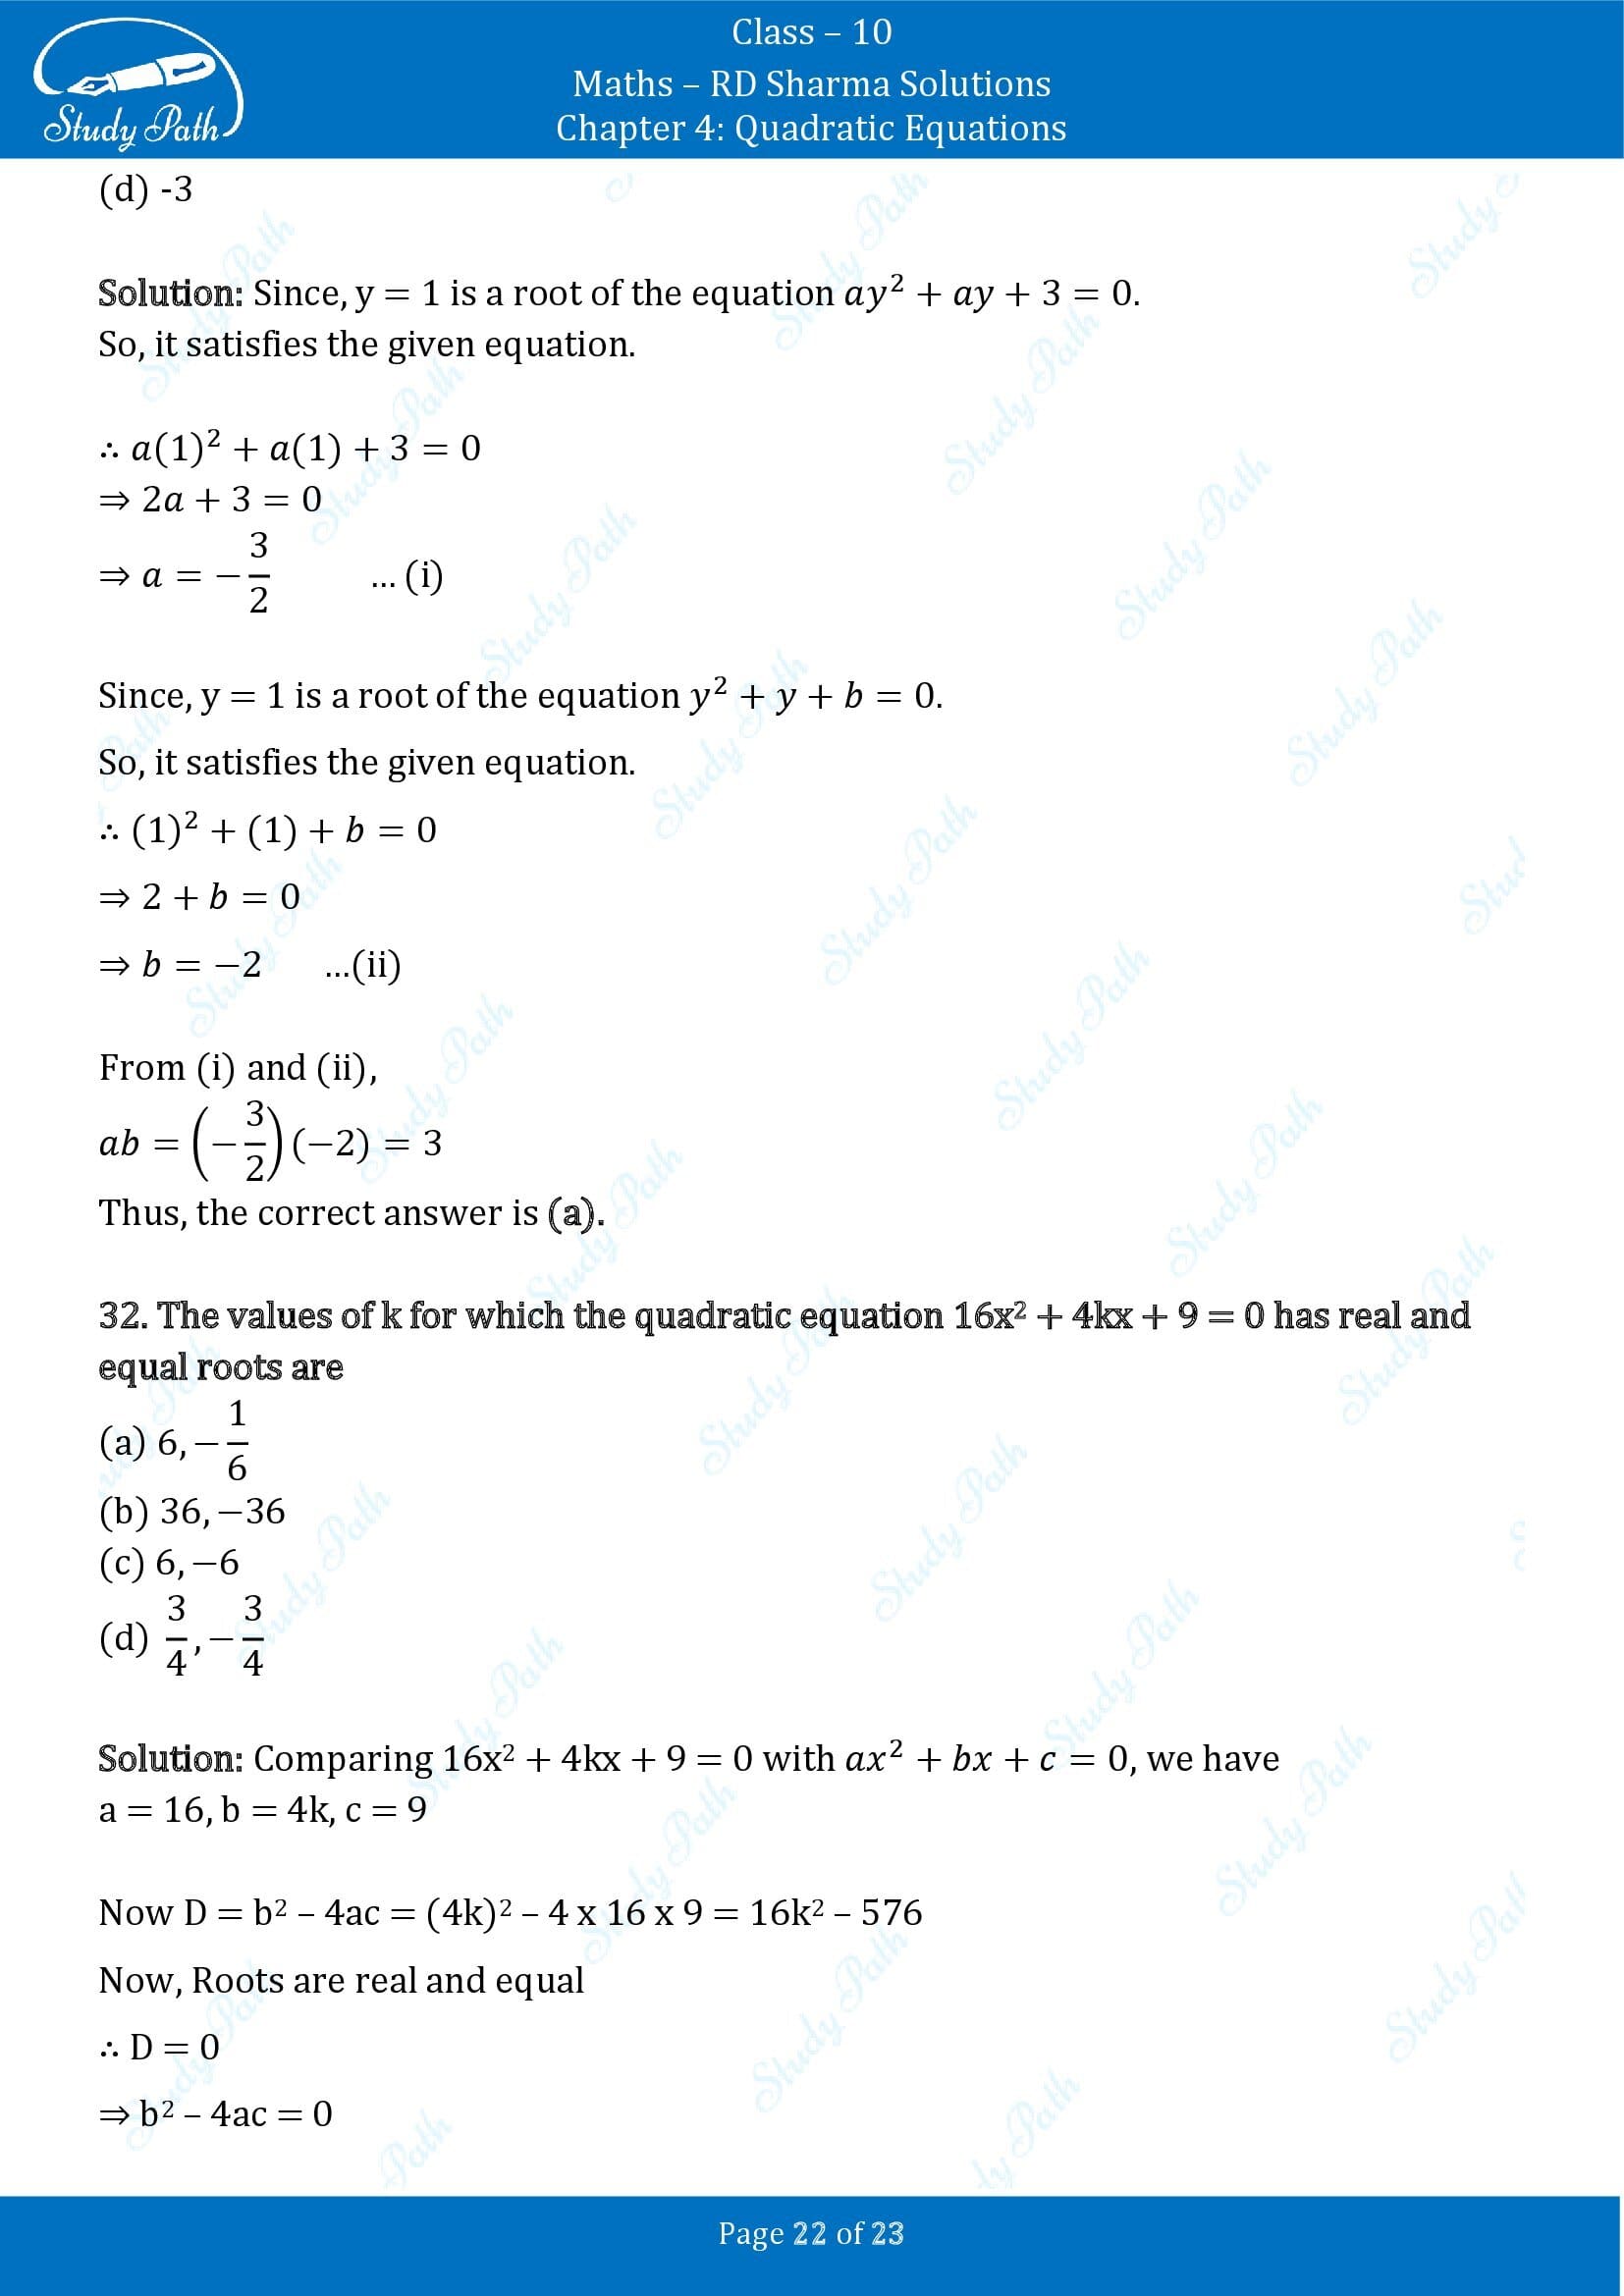 RD Sharma Solutions Class 10 Chapter 4 Quadratic Equations Multiple Choice Questions MCQs 00022